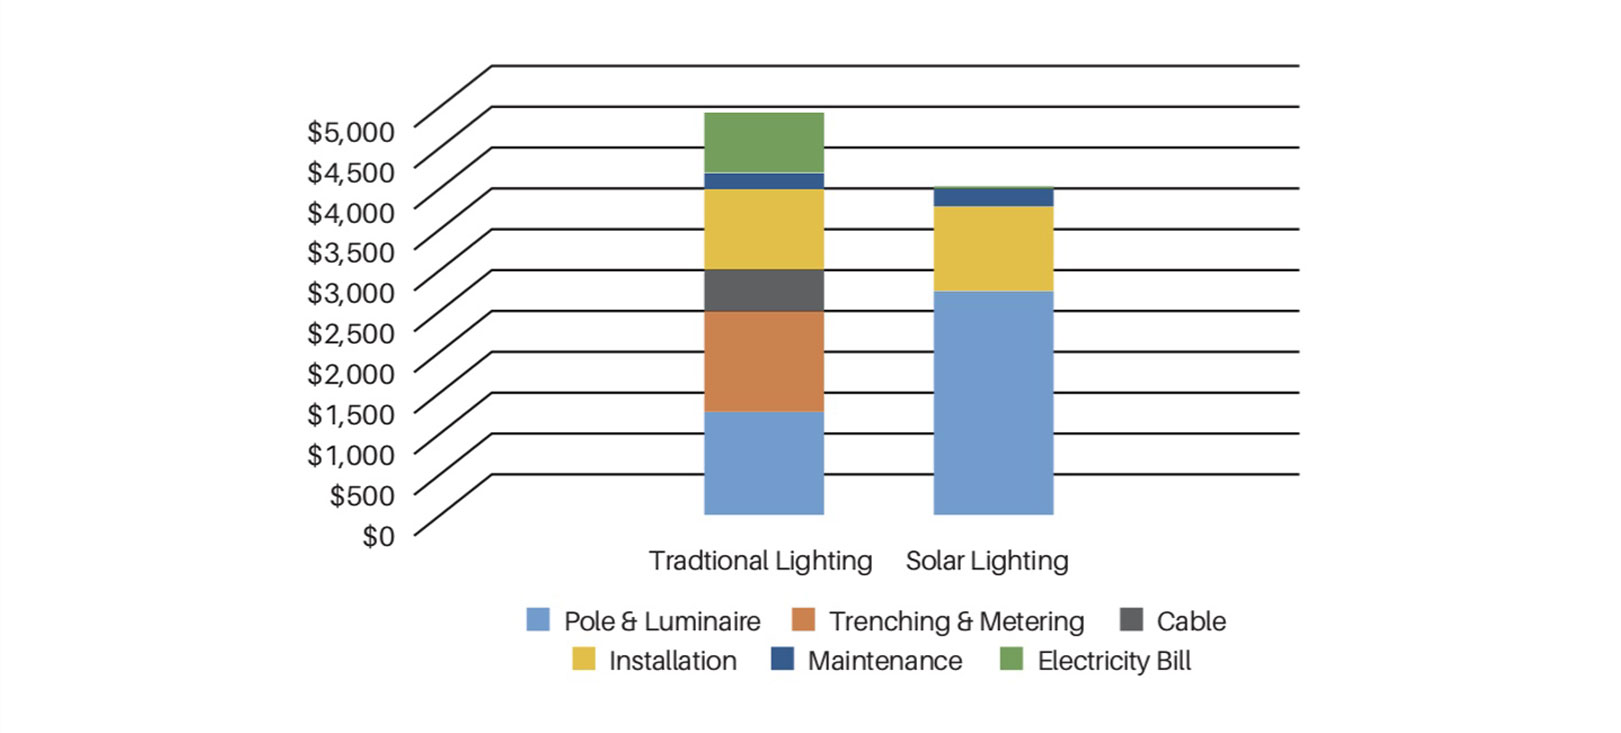 on-grid light cost comparison to a solar light